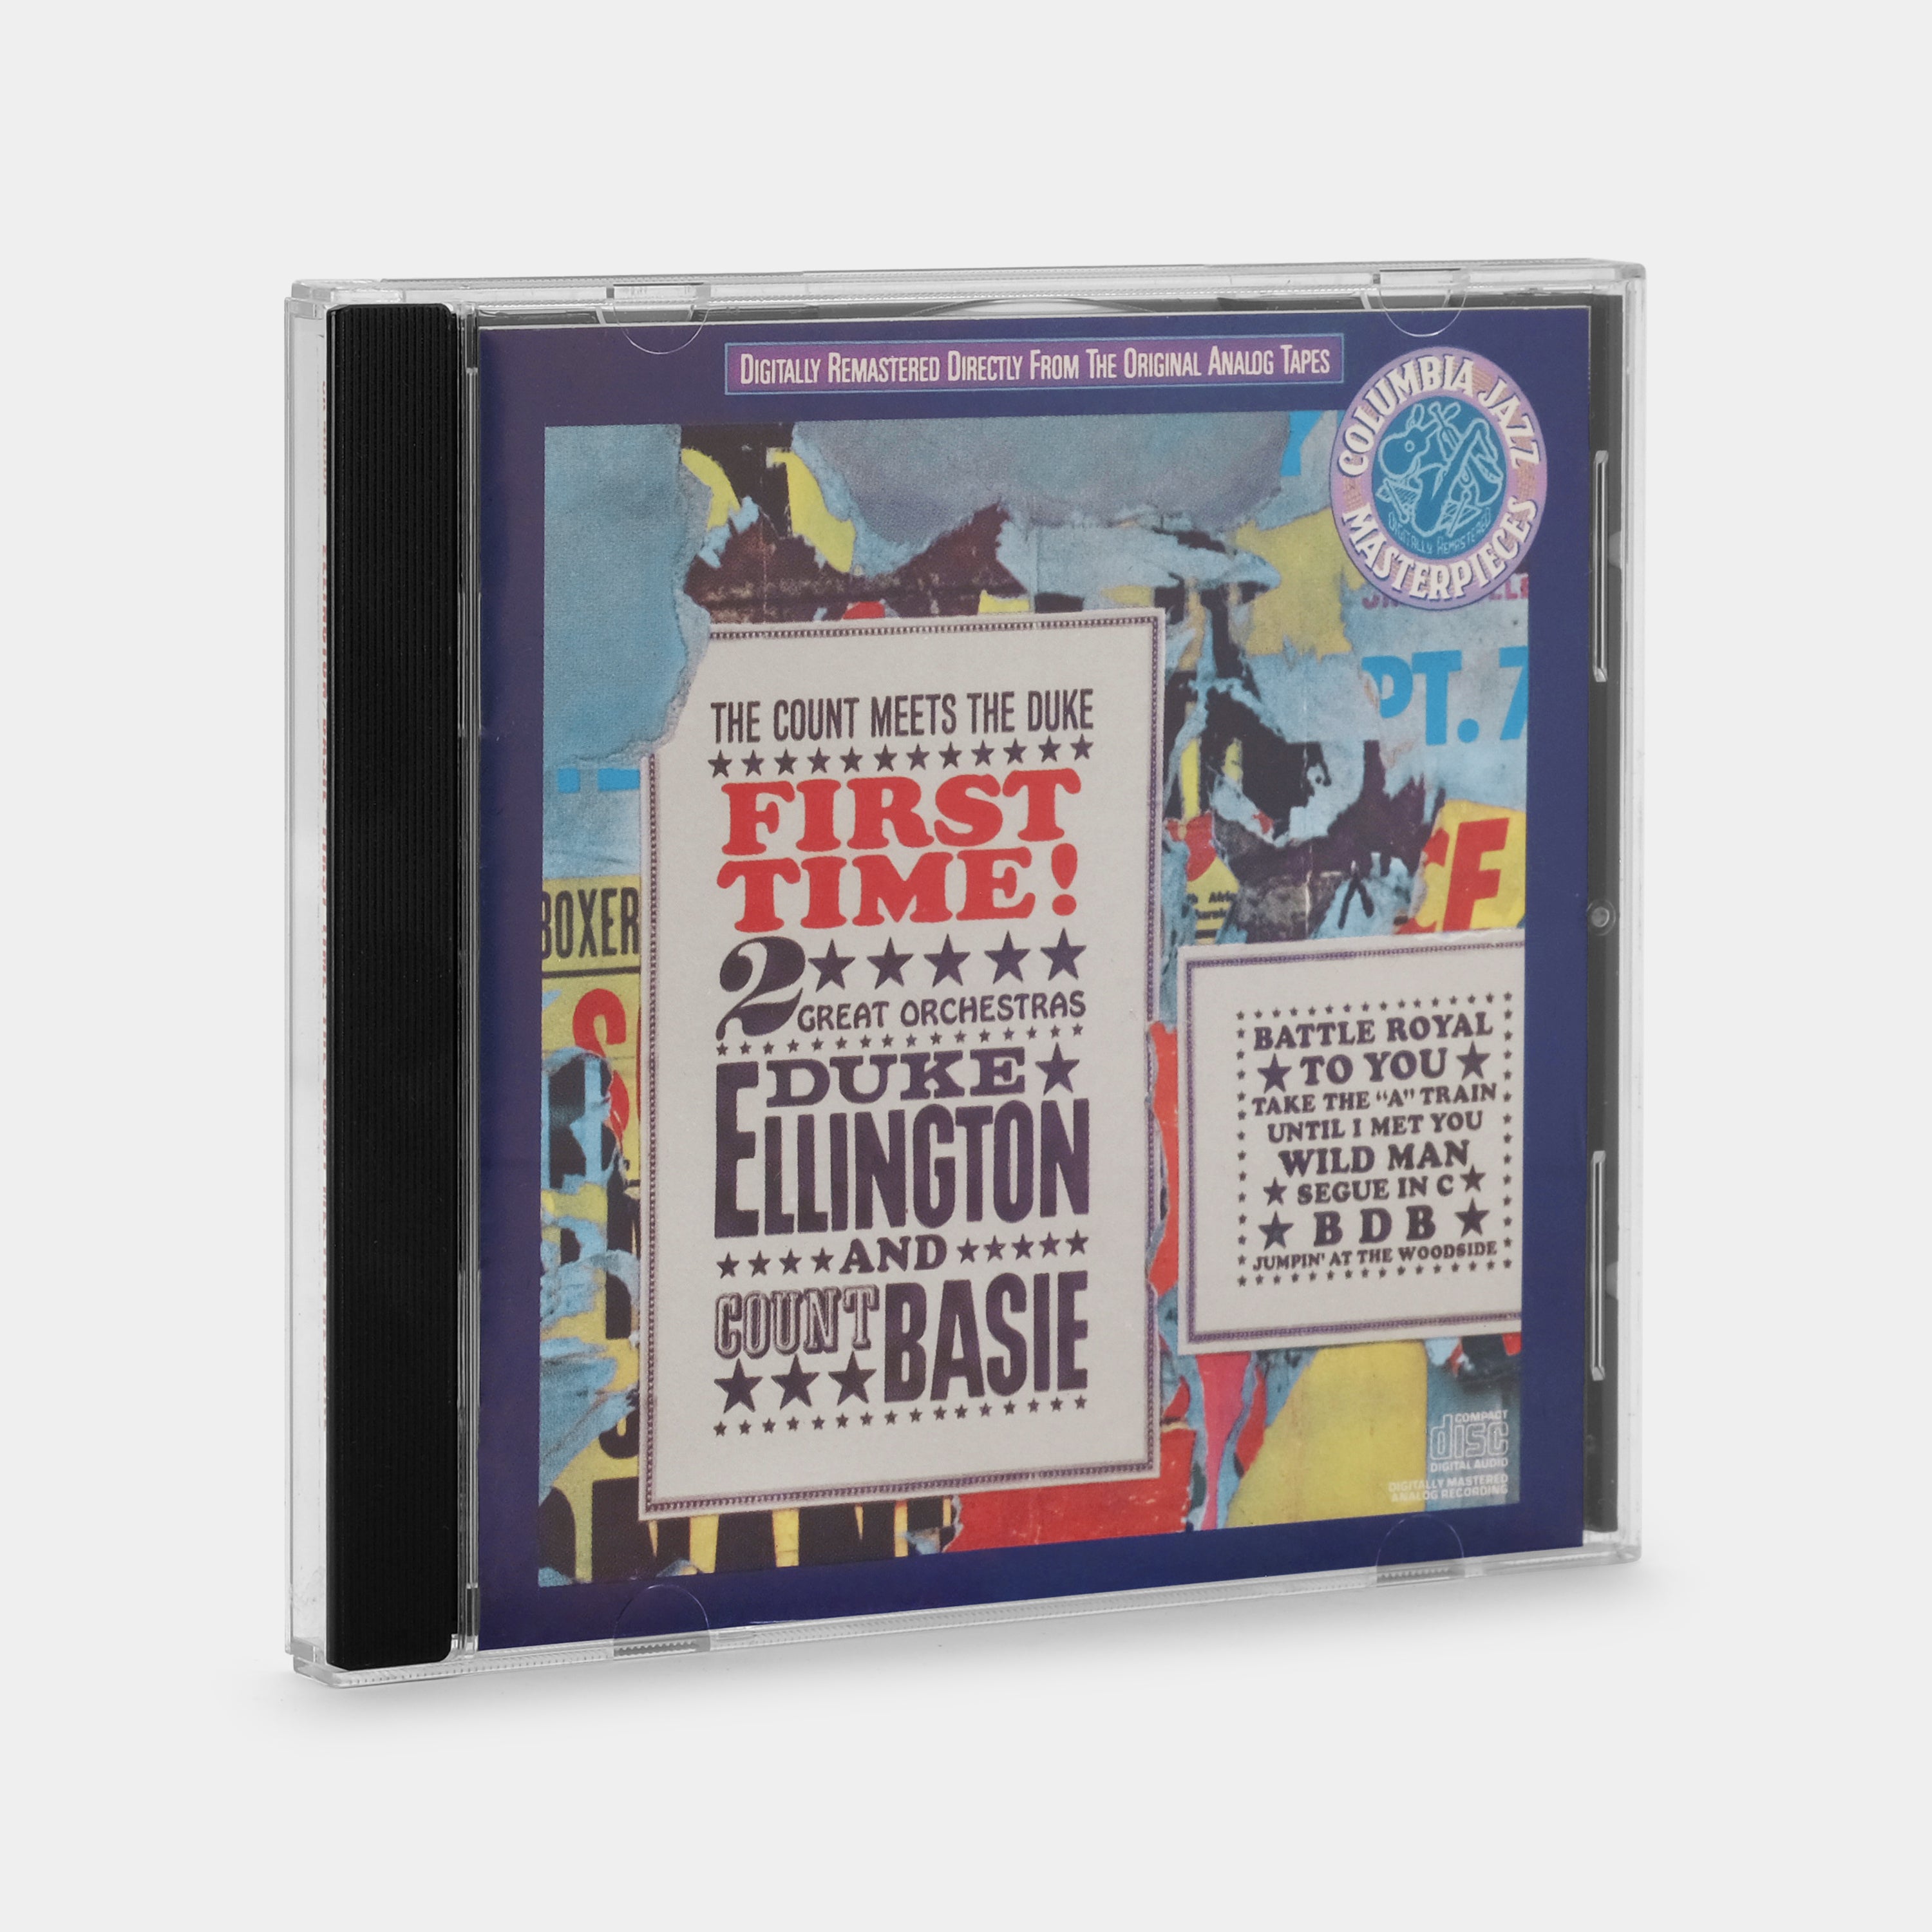 Duke Ellington And Count Basie - First Time! The Count Meets The Duke CD